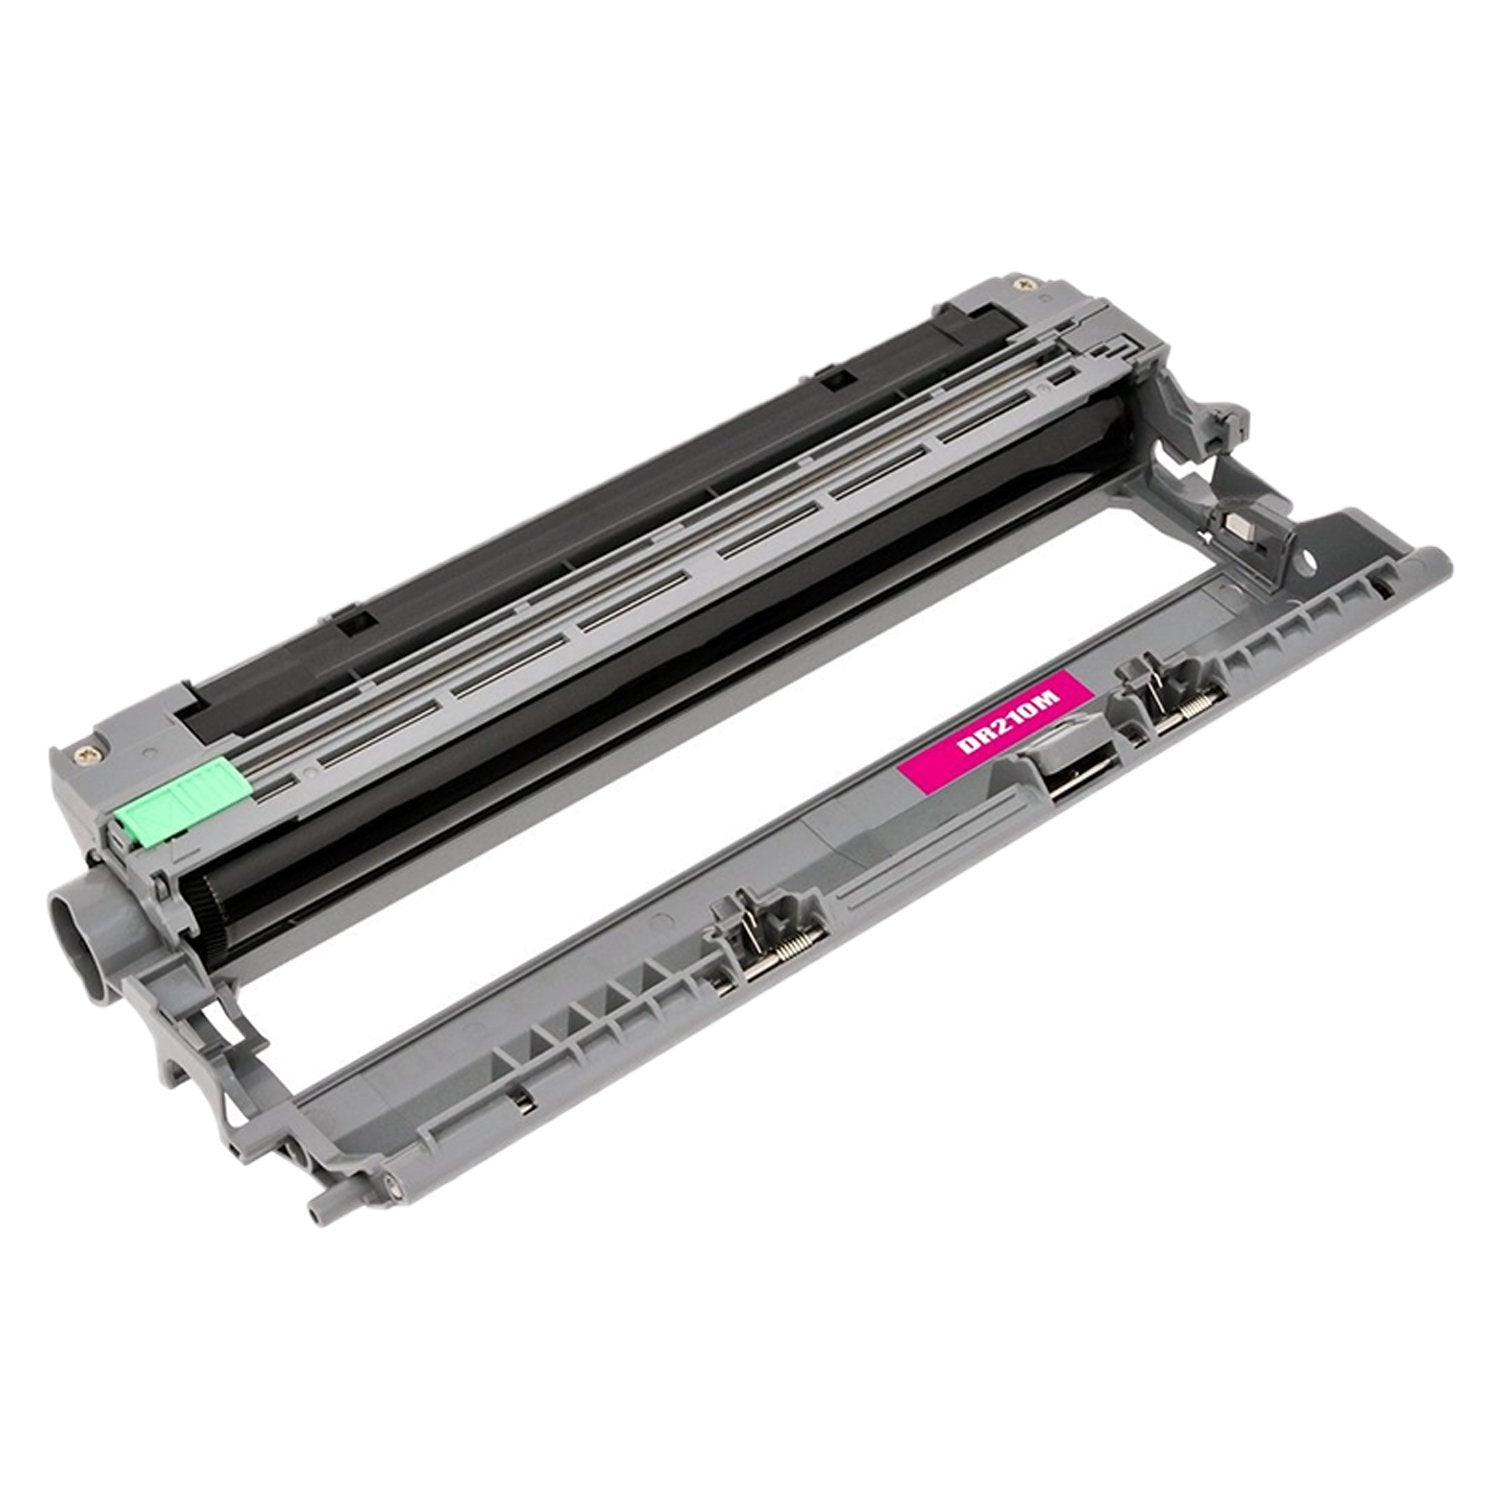 Absolute Toner Compatible Brother DR210 Magenta Drum Unit Toner Cartridge | Absolute Toner Brother Toner Cartridges